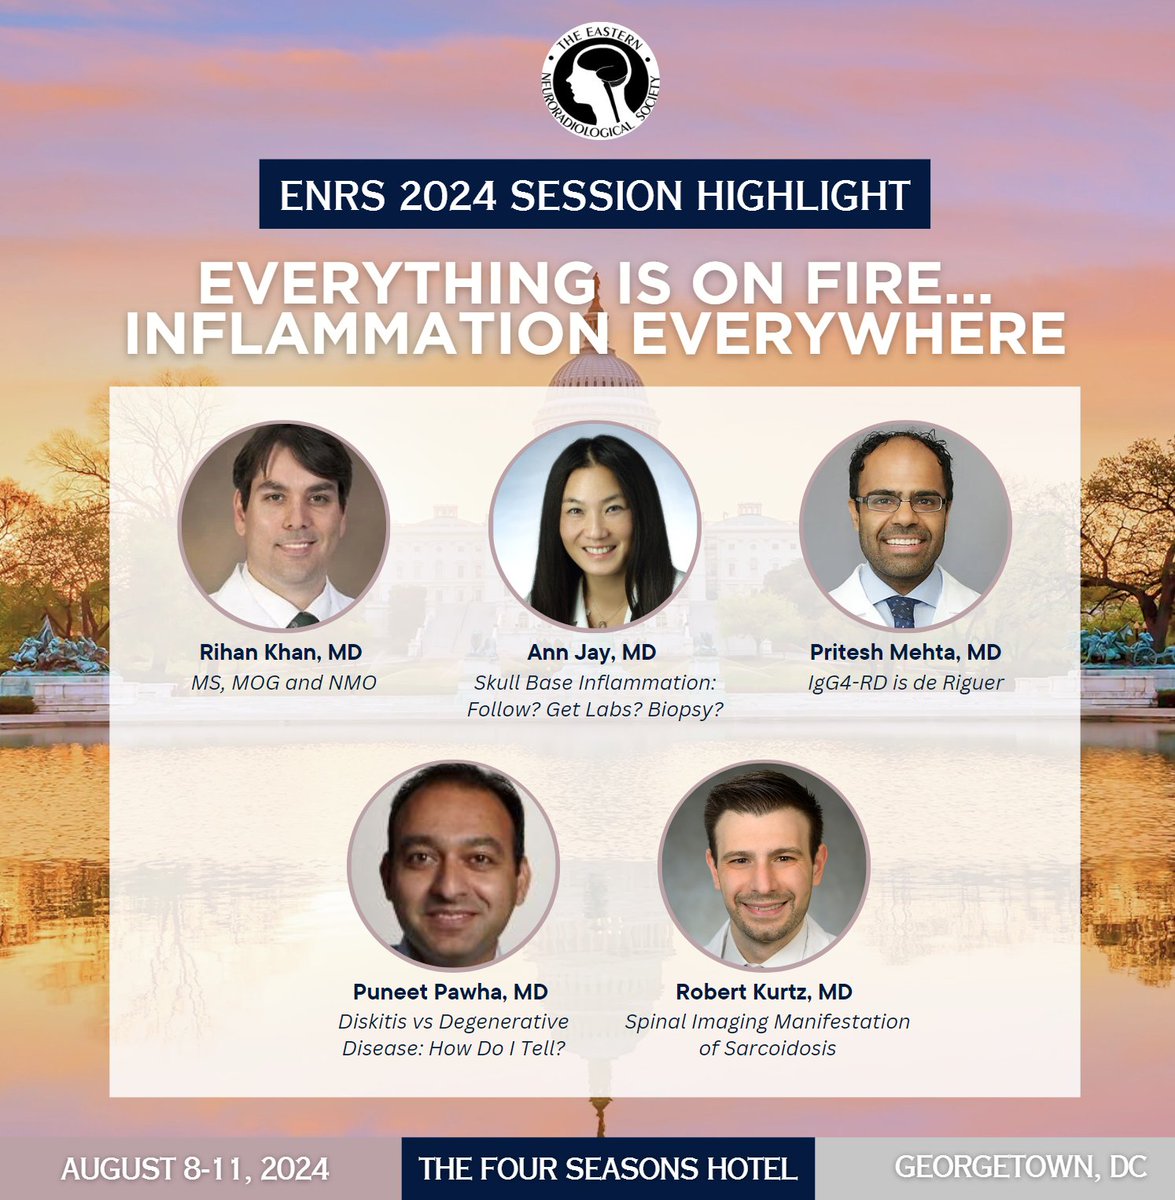 Is it getting hot in here? Superstar panel of speakers discusses inflammation in the neuro , spine and head and neck realm at #ENRS24; coming up soon . Be there! @AnnJayMD1 @francisdeng @amyjuliano @gmoonis #ENRS24 @ASNR @ASHNR @ASSR